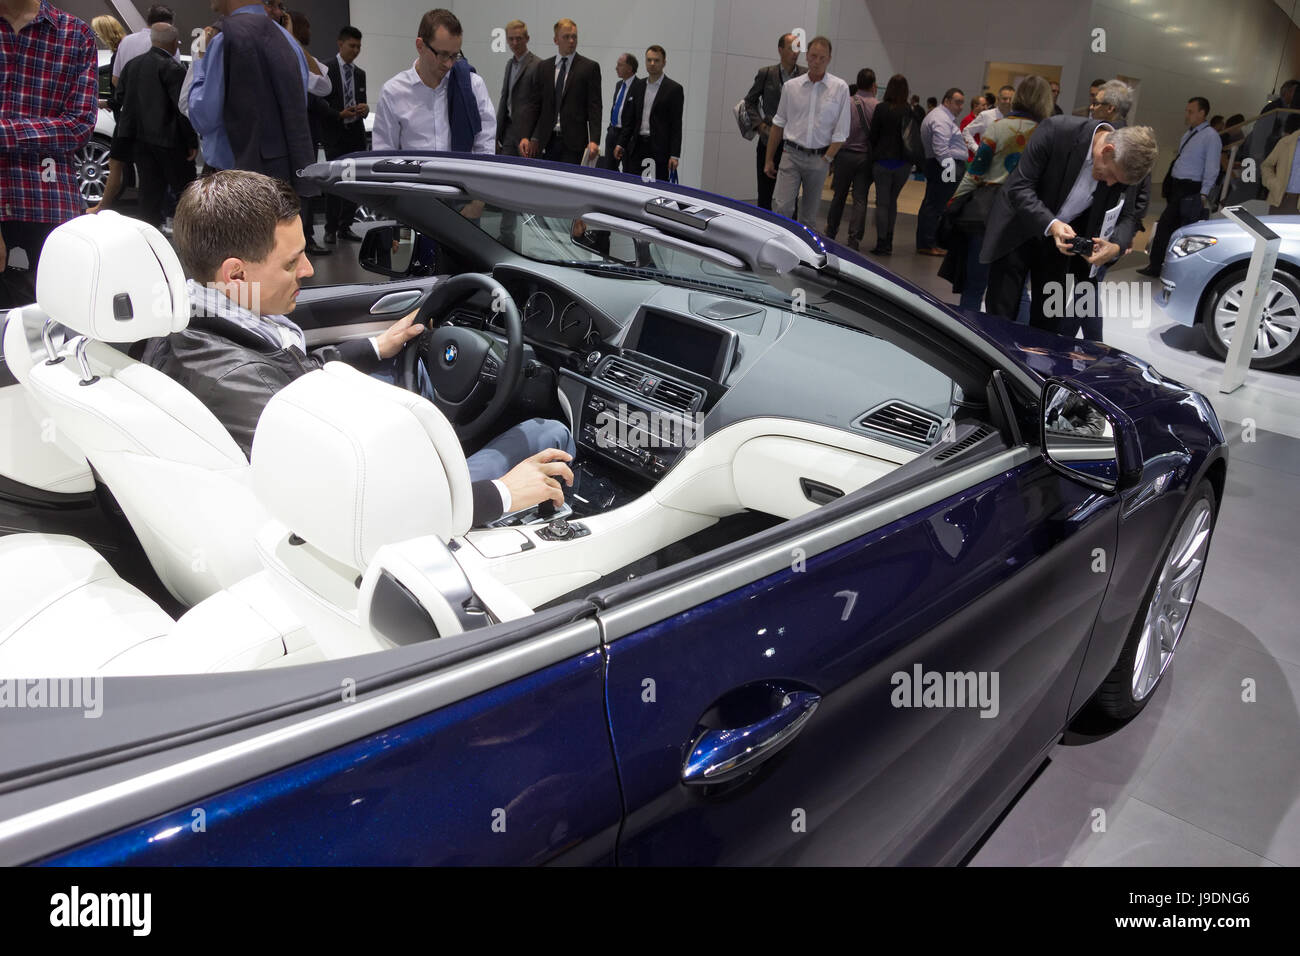 FRANKFURT, GERMANY - SEP 13: Visitor inside a BMW 640i Cabrio at the IAA motor show on Sep 13, 2013 in Frankfurt. More than 1.000 exhibitors from 35 c Stock Photo